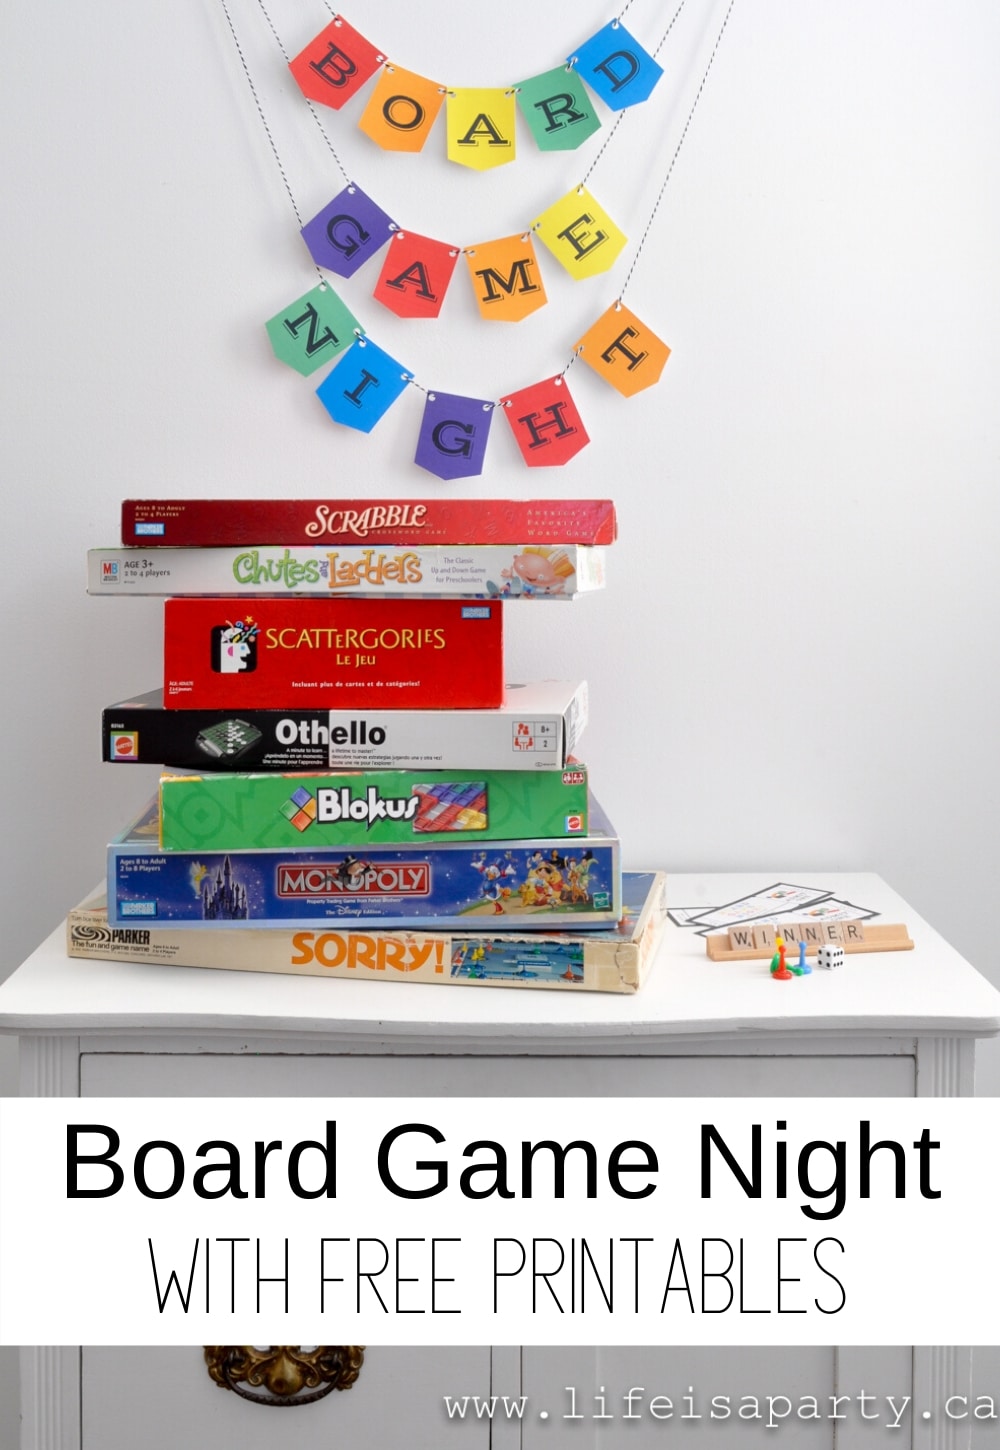 board game night banner and stack of board games